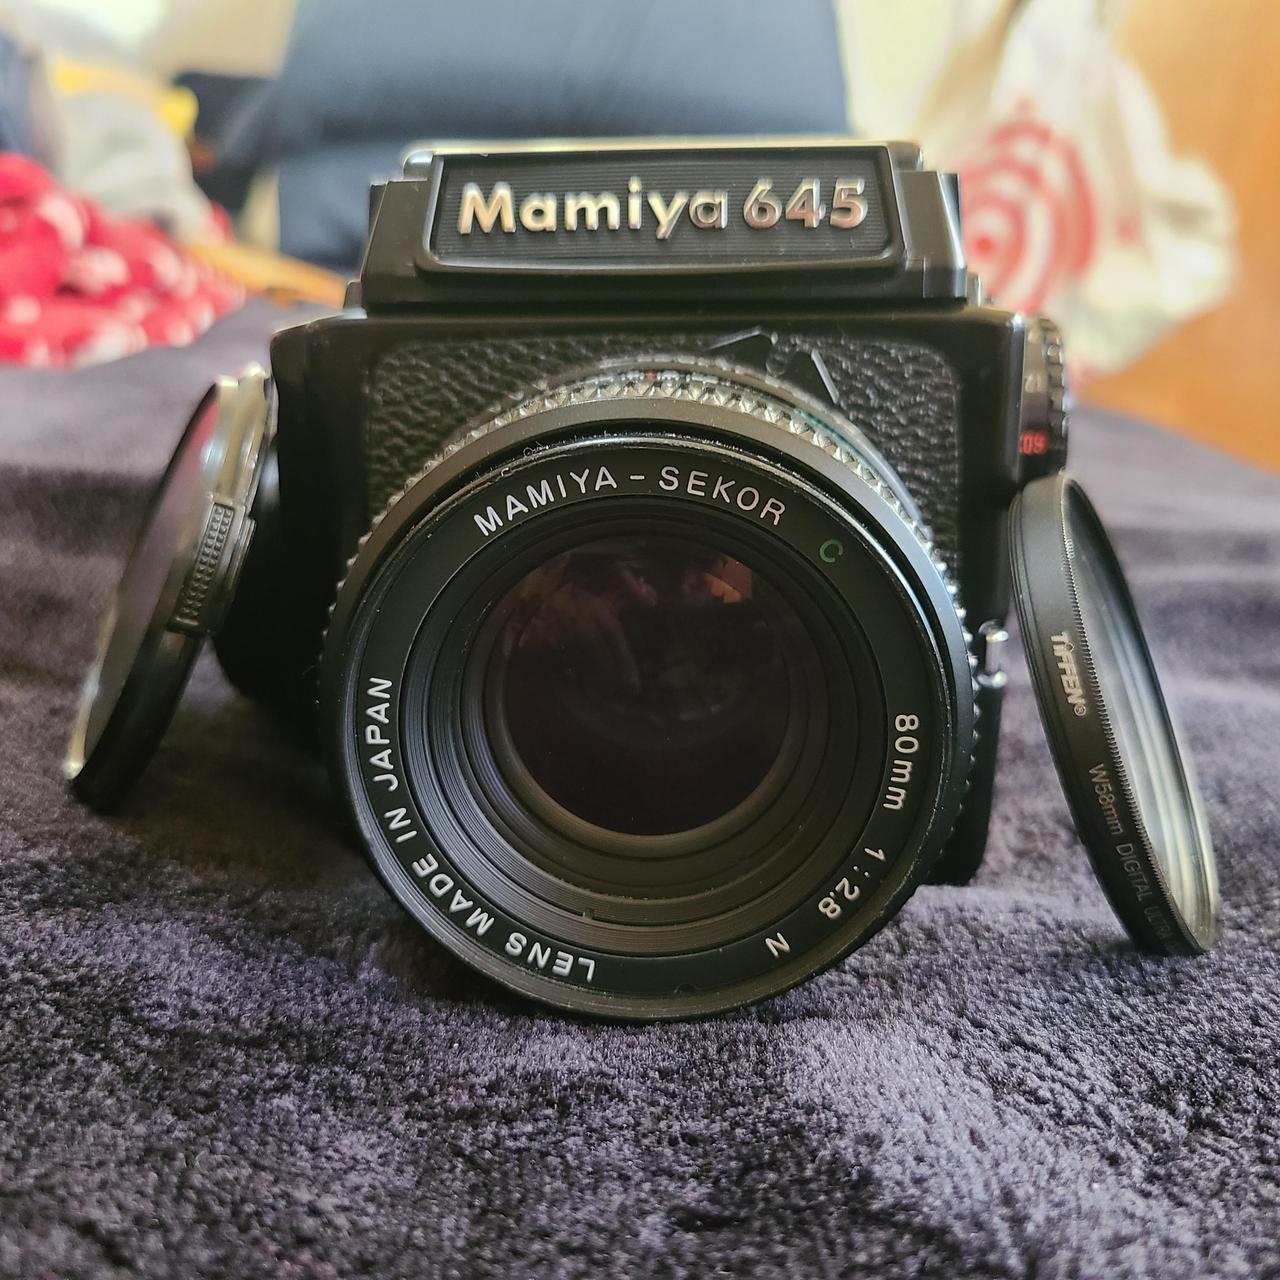 Product Image 1 - Selling this Mamiya 645 with